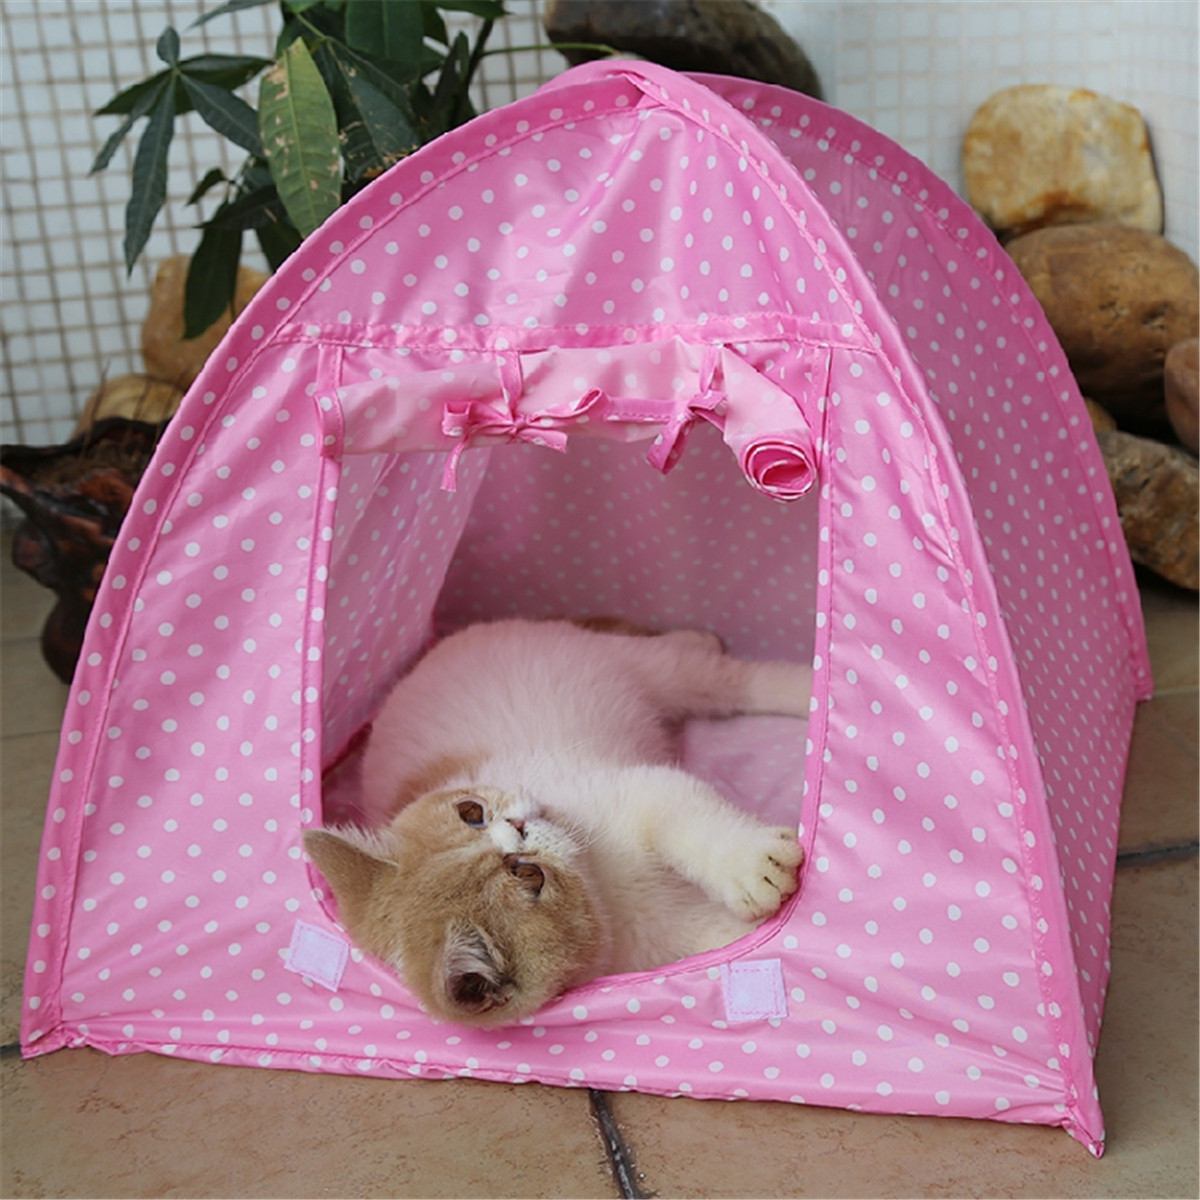 Collapsible pet tent